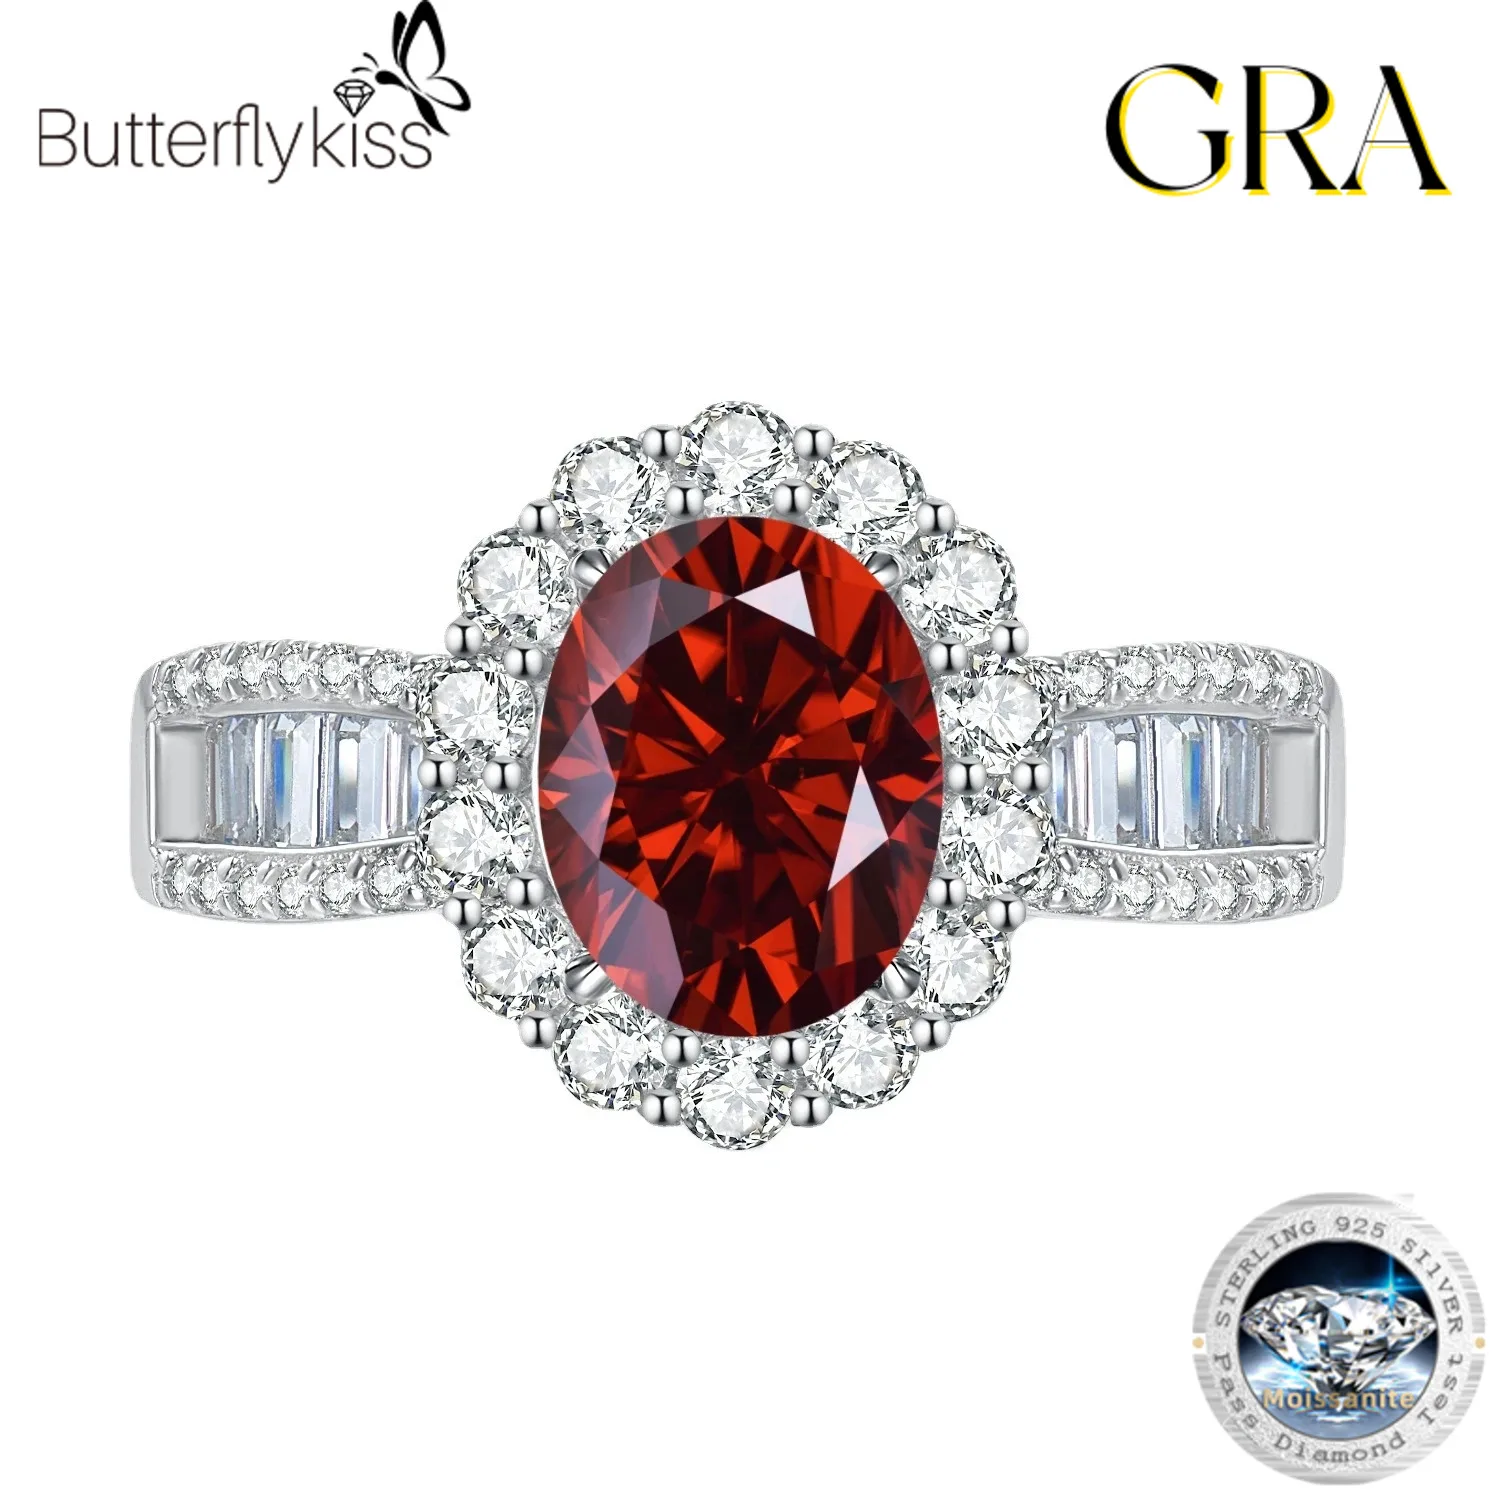 

Butterflykiss 2.0CT Oval Moissanite Ring With Certificate Sparkling Red Diamond S925 Silver Wedding Band Fine Jewelry For Women